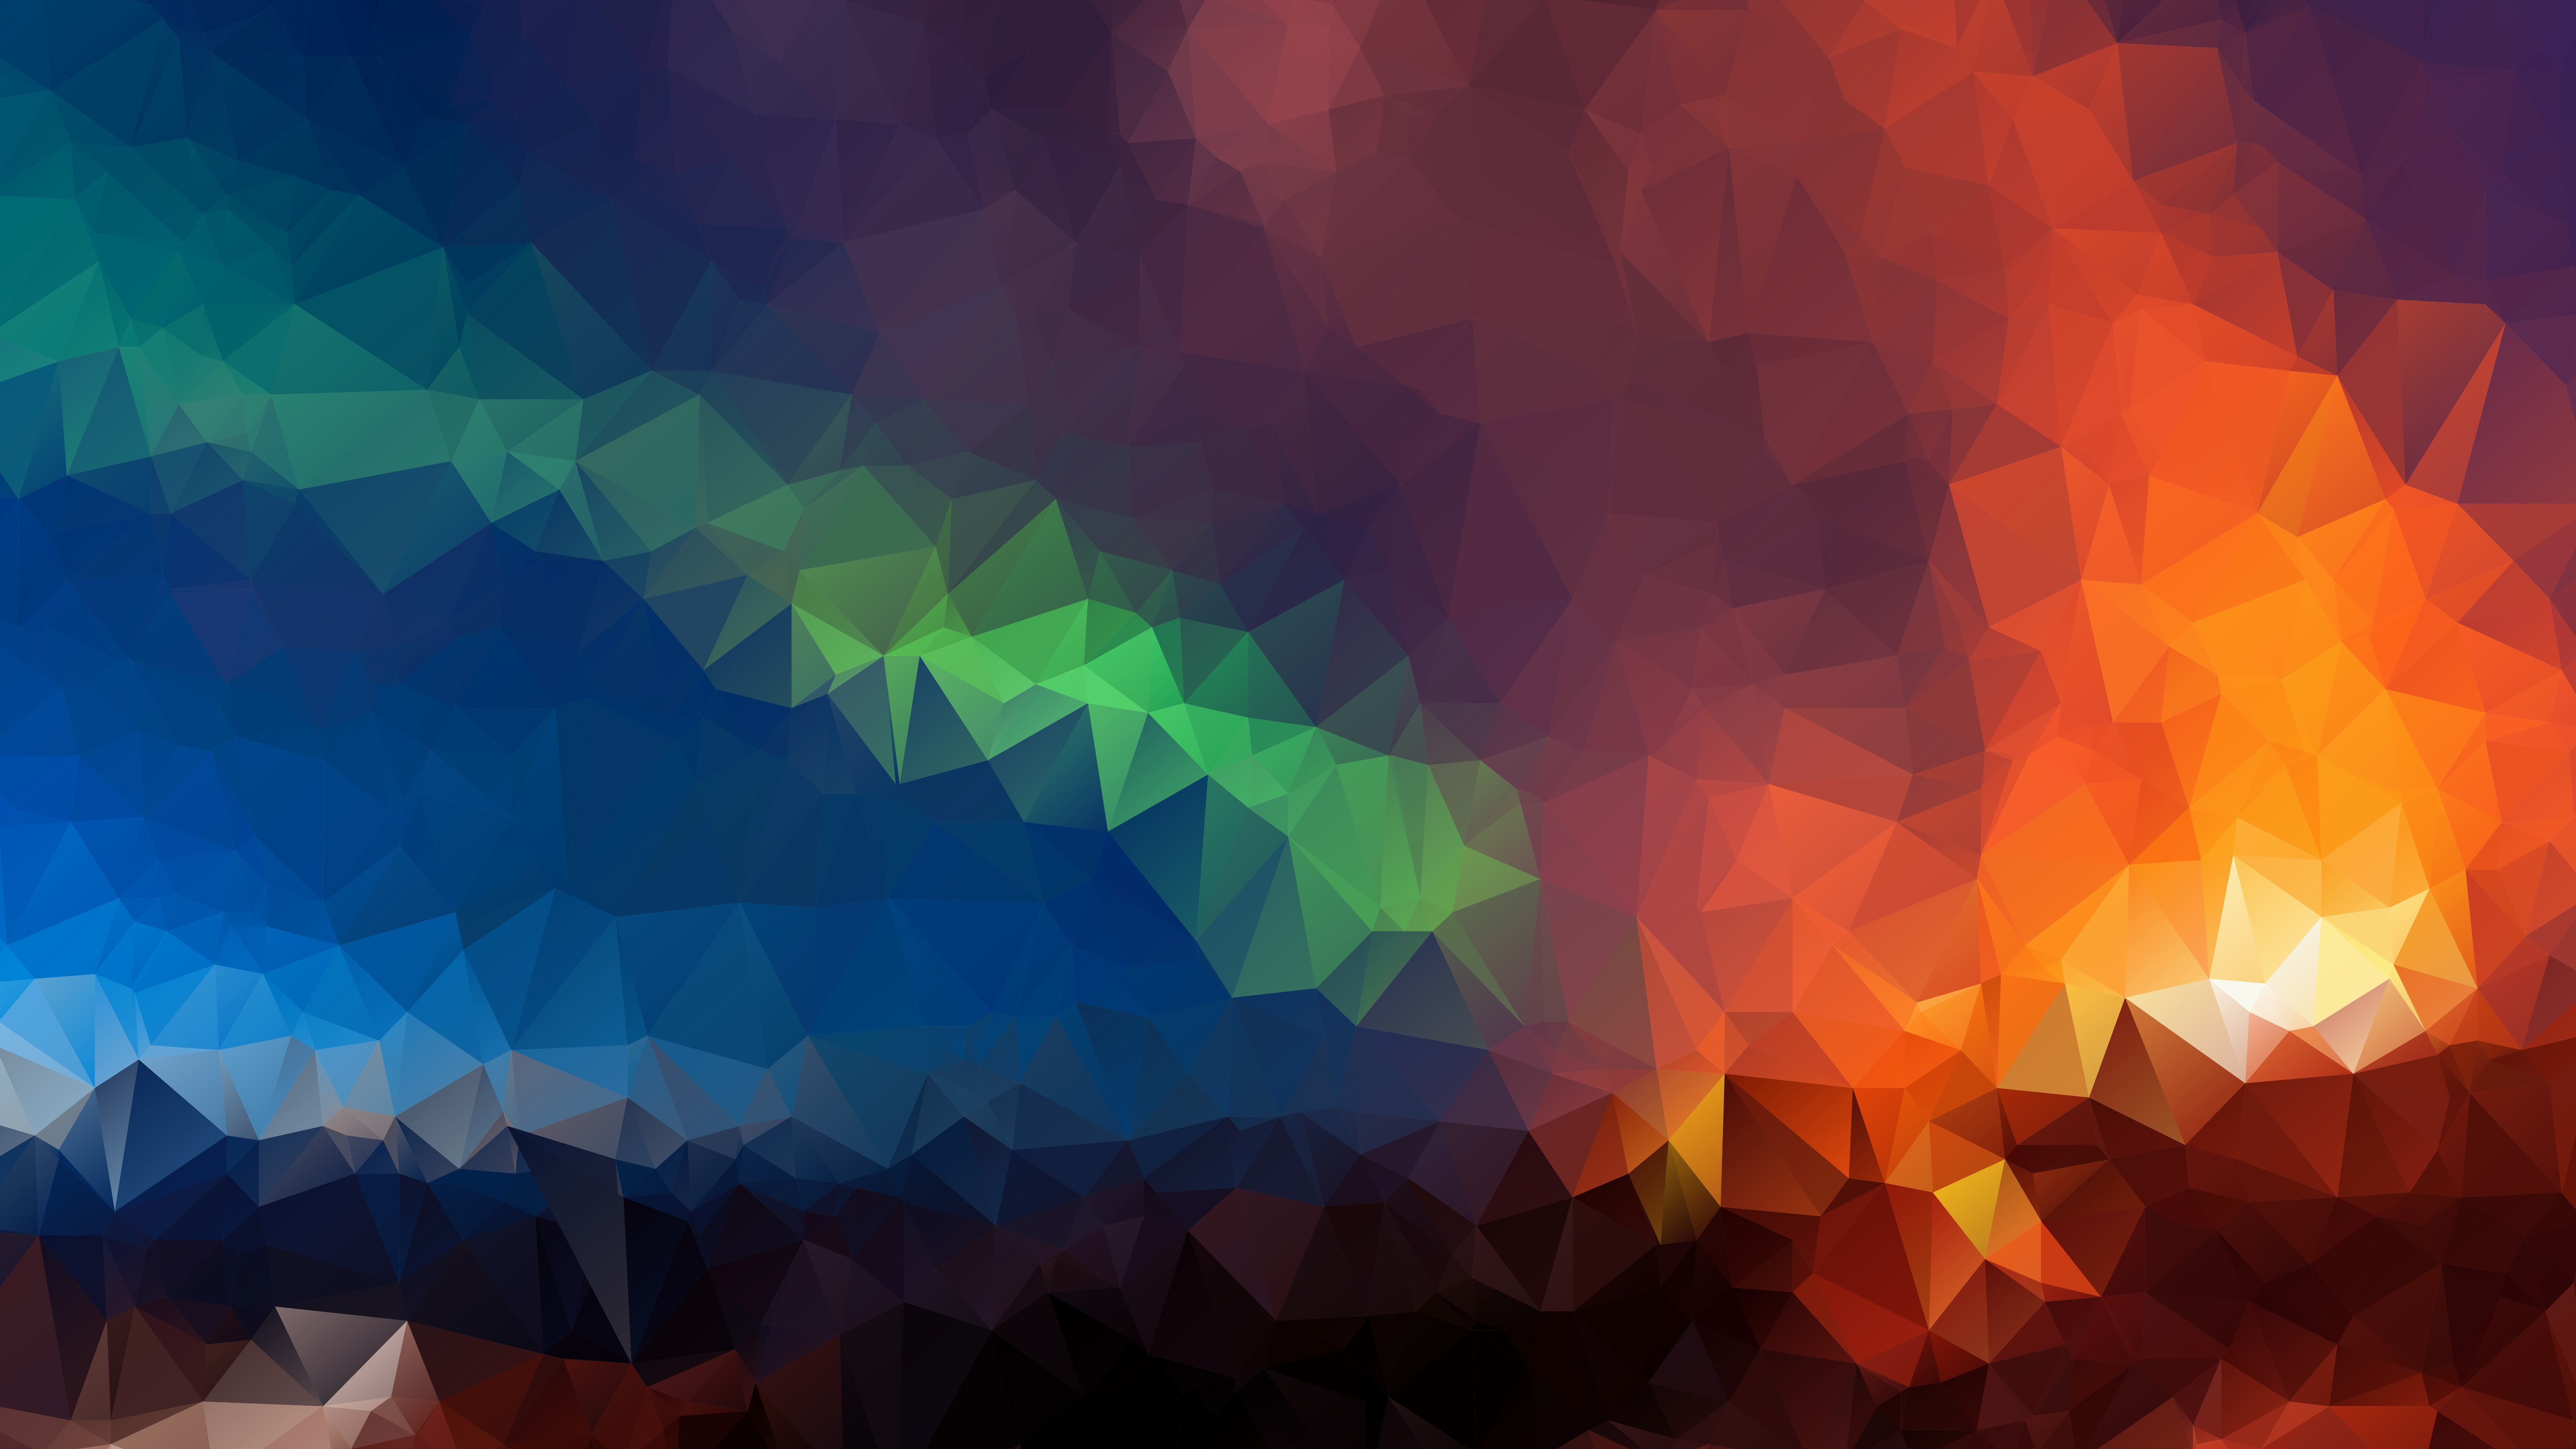 Abstract wallpaper in 8k stock photo. Image of resolution - 252883884